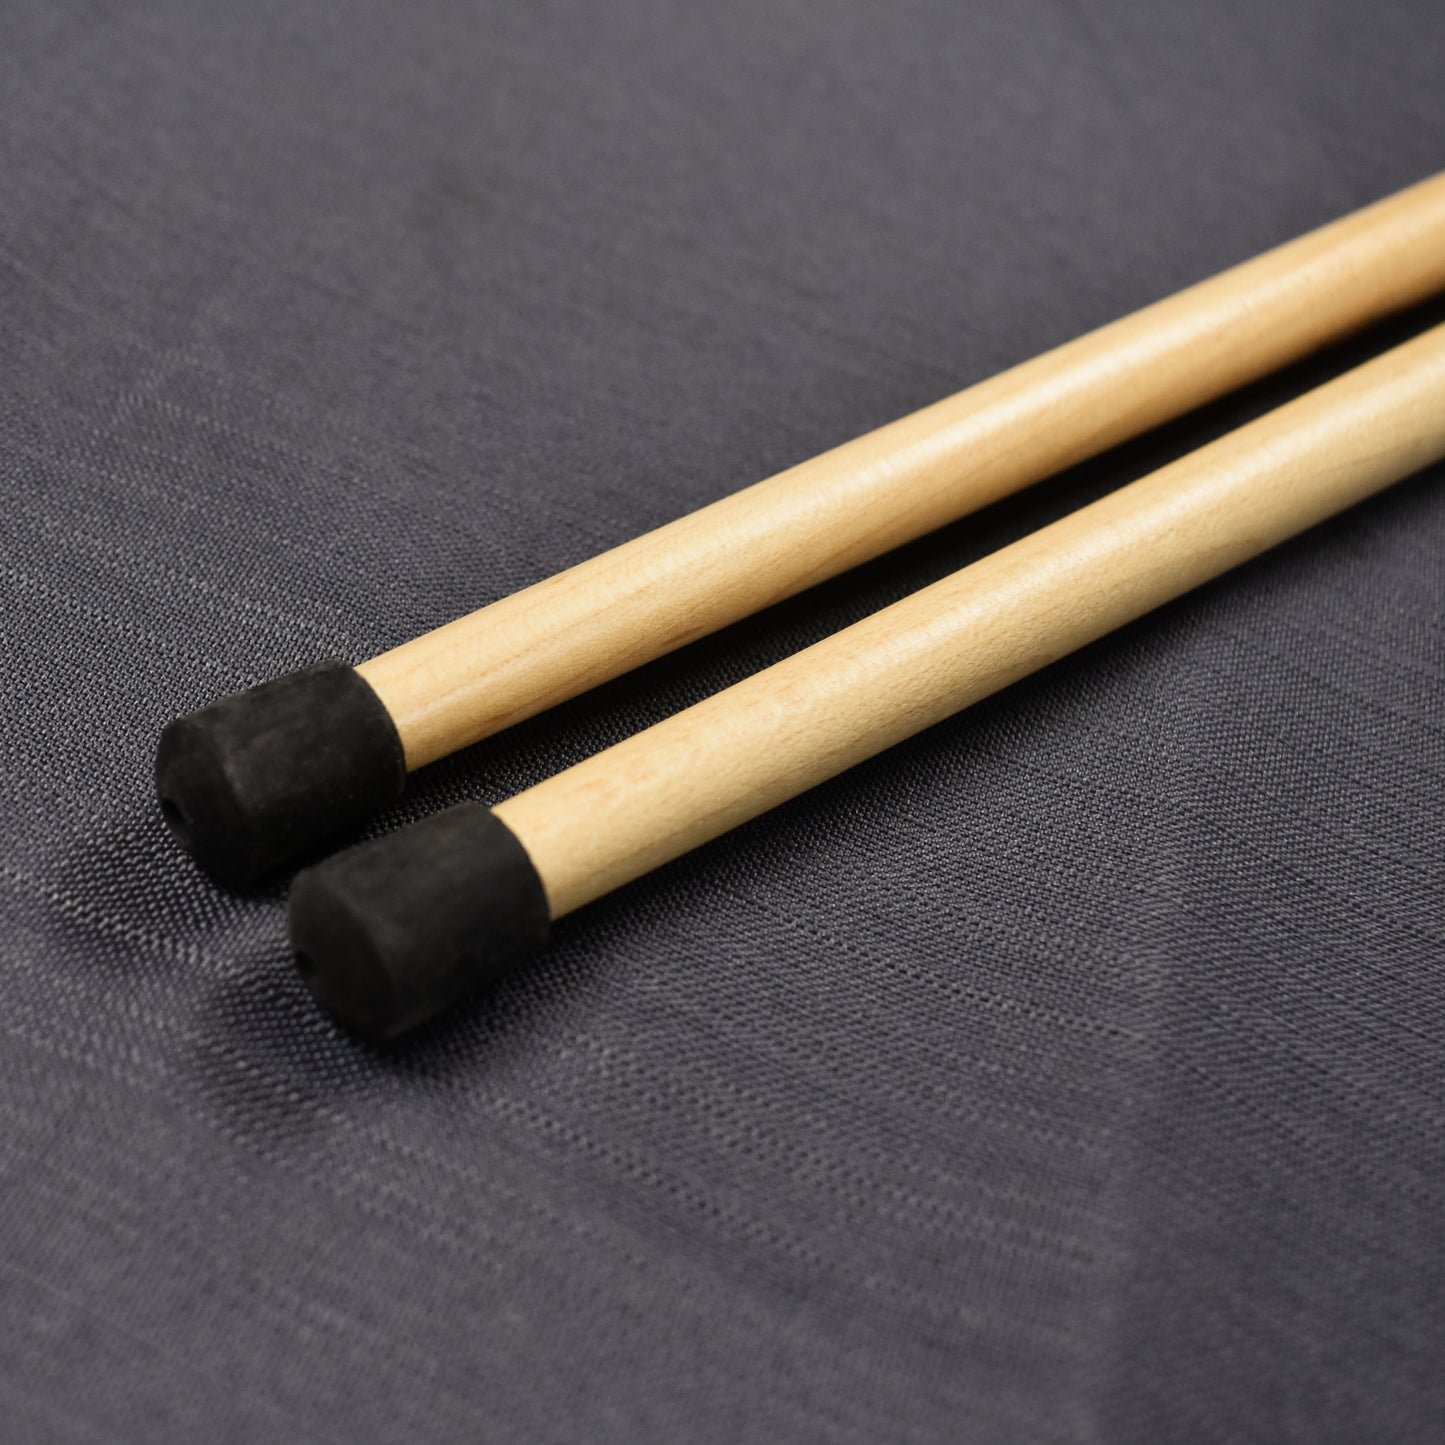 Set of 2 Deluxe Crokinole Cue Sticks with Gripper Knob (20.5" Length)